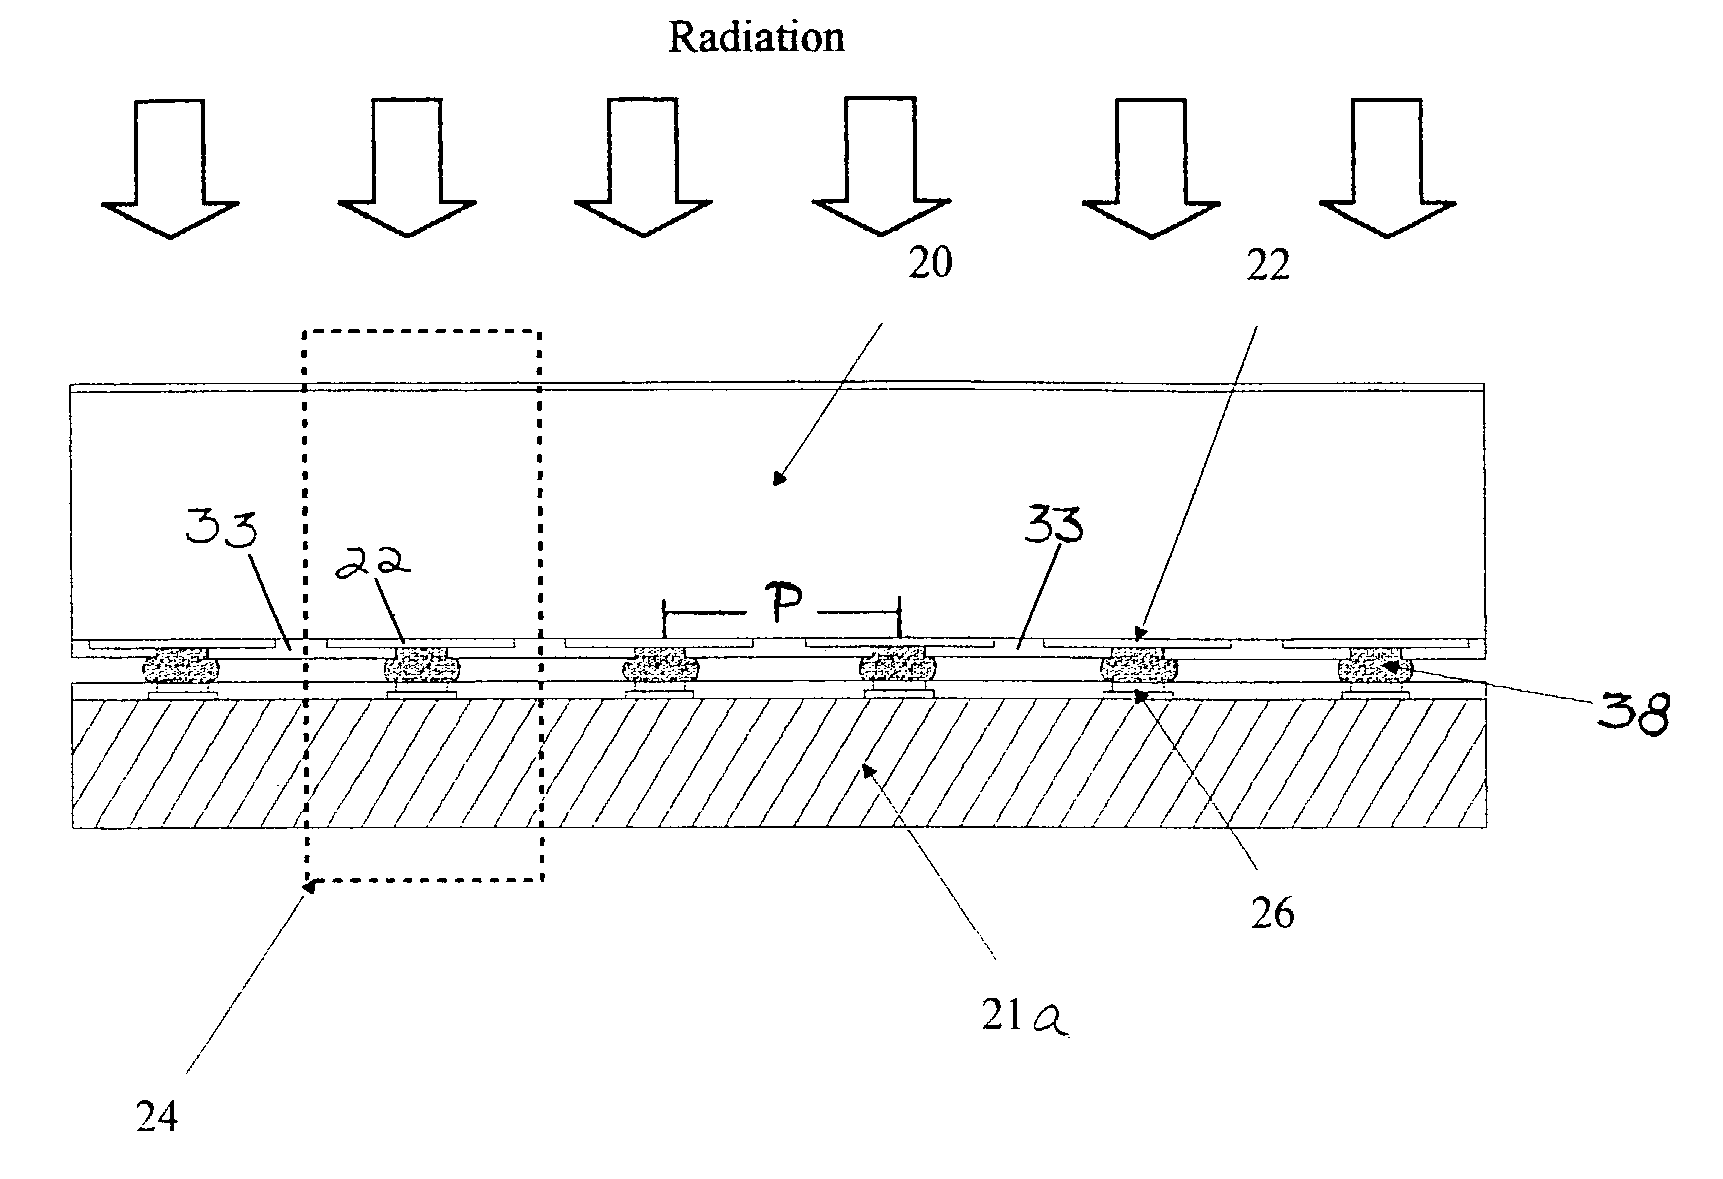 Conductive adhesive bonded semiconductor substrates for radiation imaging devices